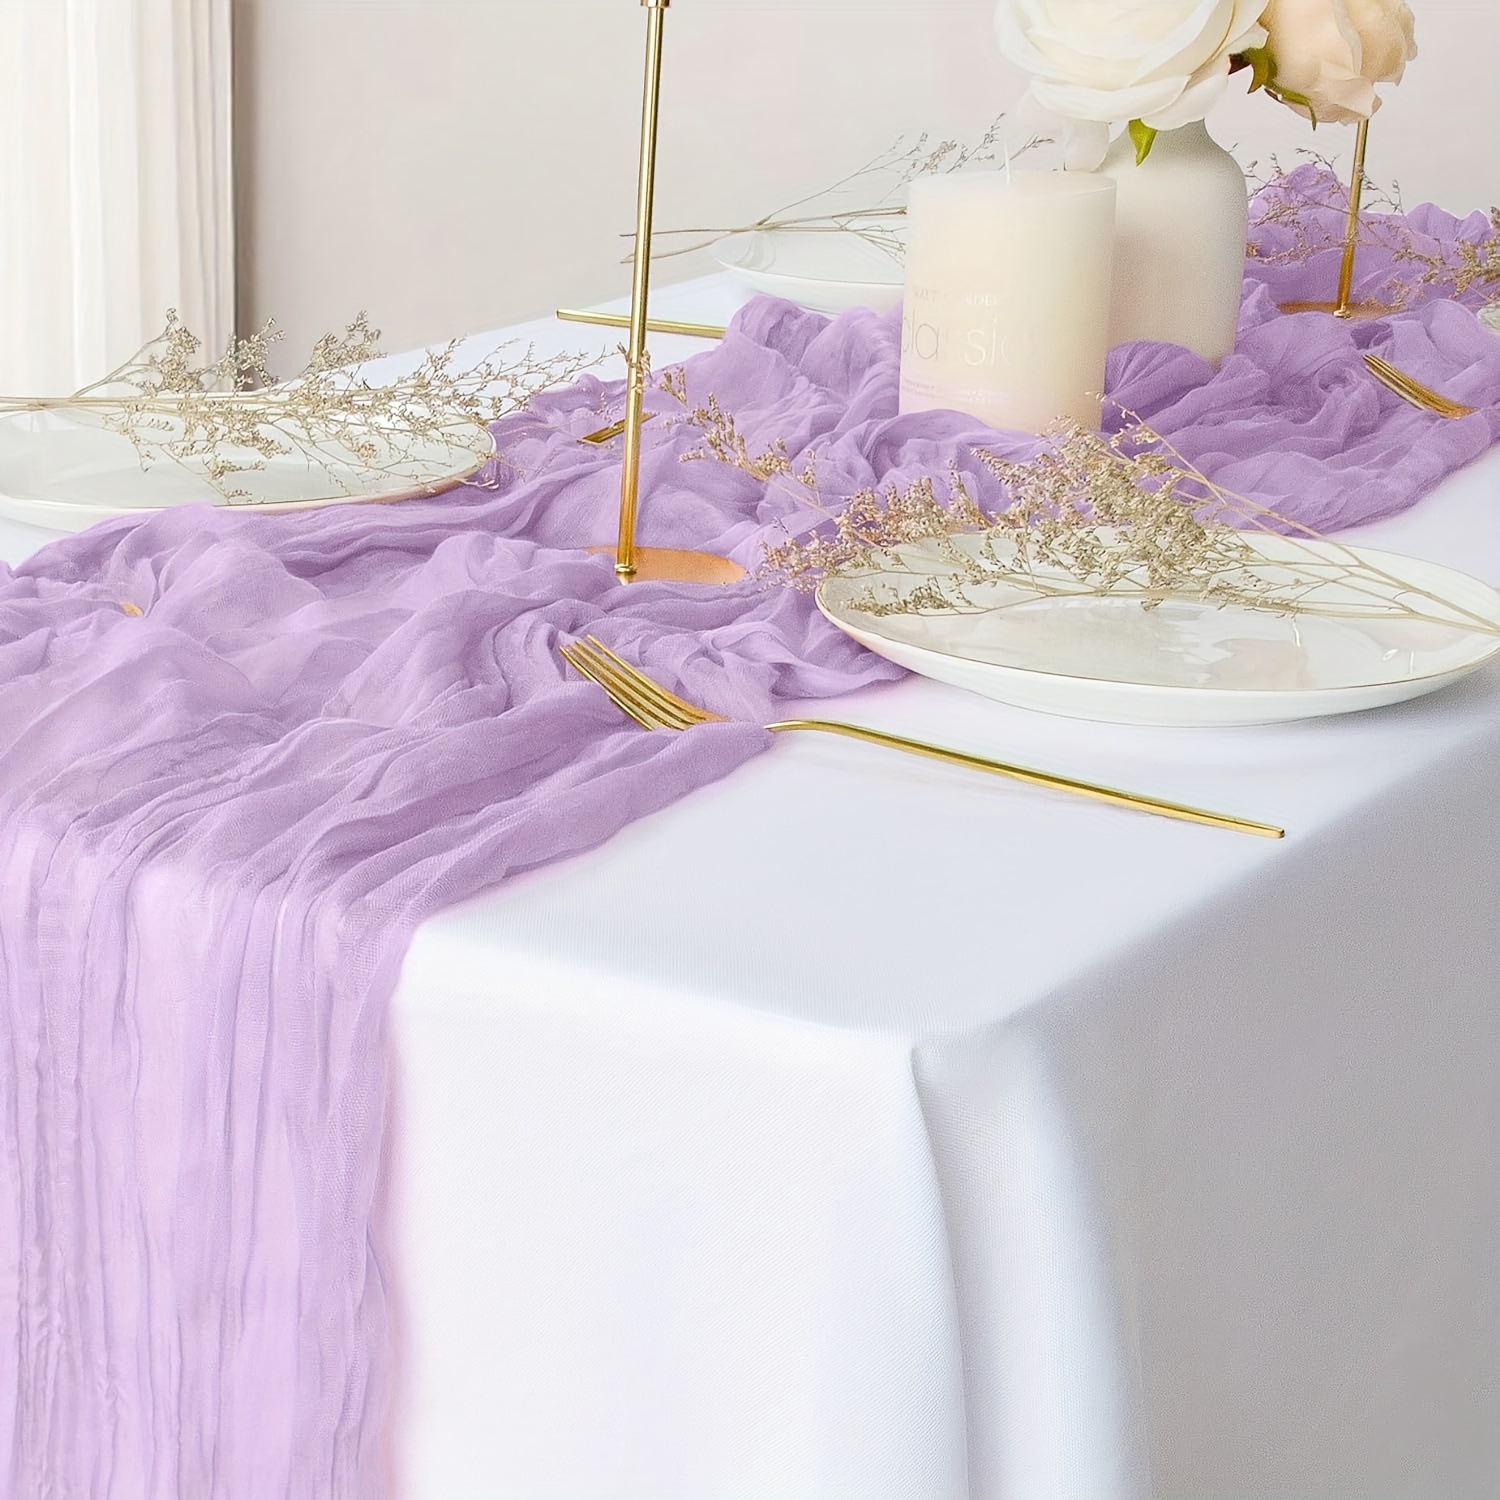 

1pc Table Runner, Lilac Cheese Cloth Table Runner, Light Purple 35x118in Bohemian Gauze Cheese Cloth Table Runner, For Wedding, Bride Baby Shower, Birthday, Party Table Decoration, Home Supplies